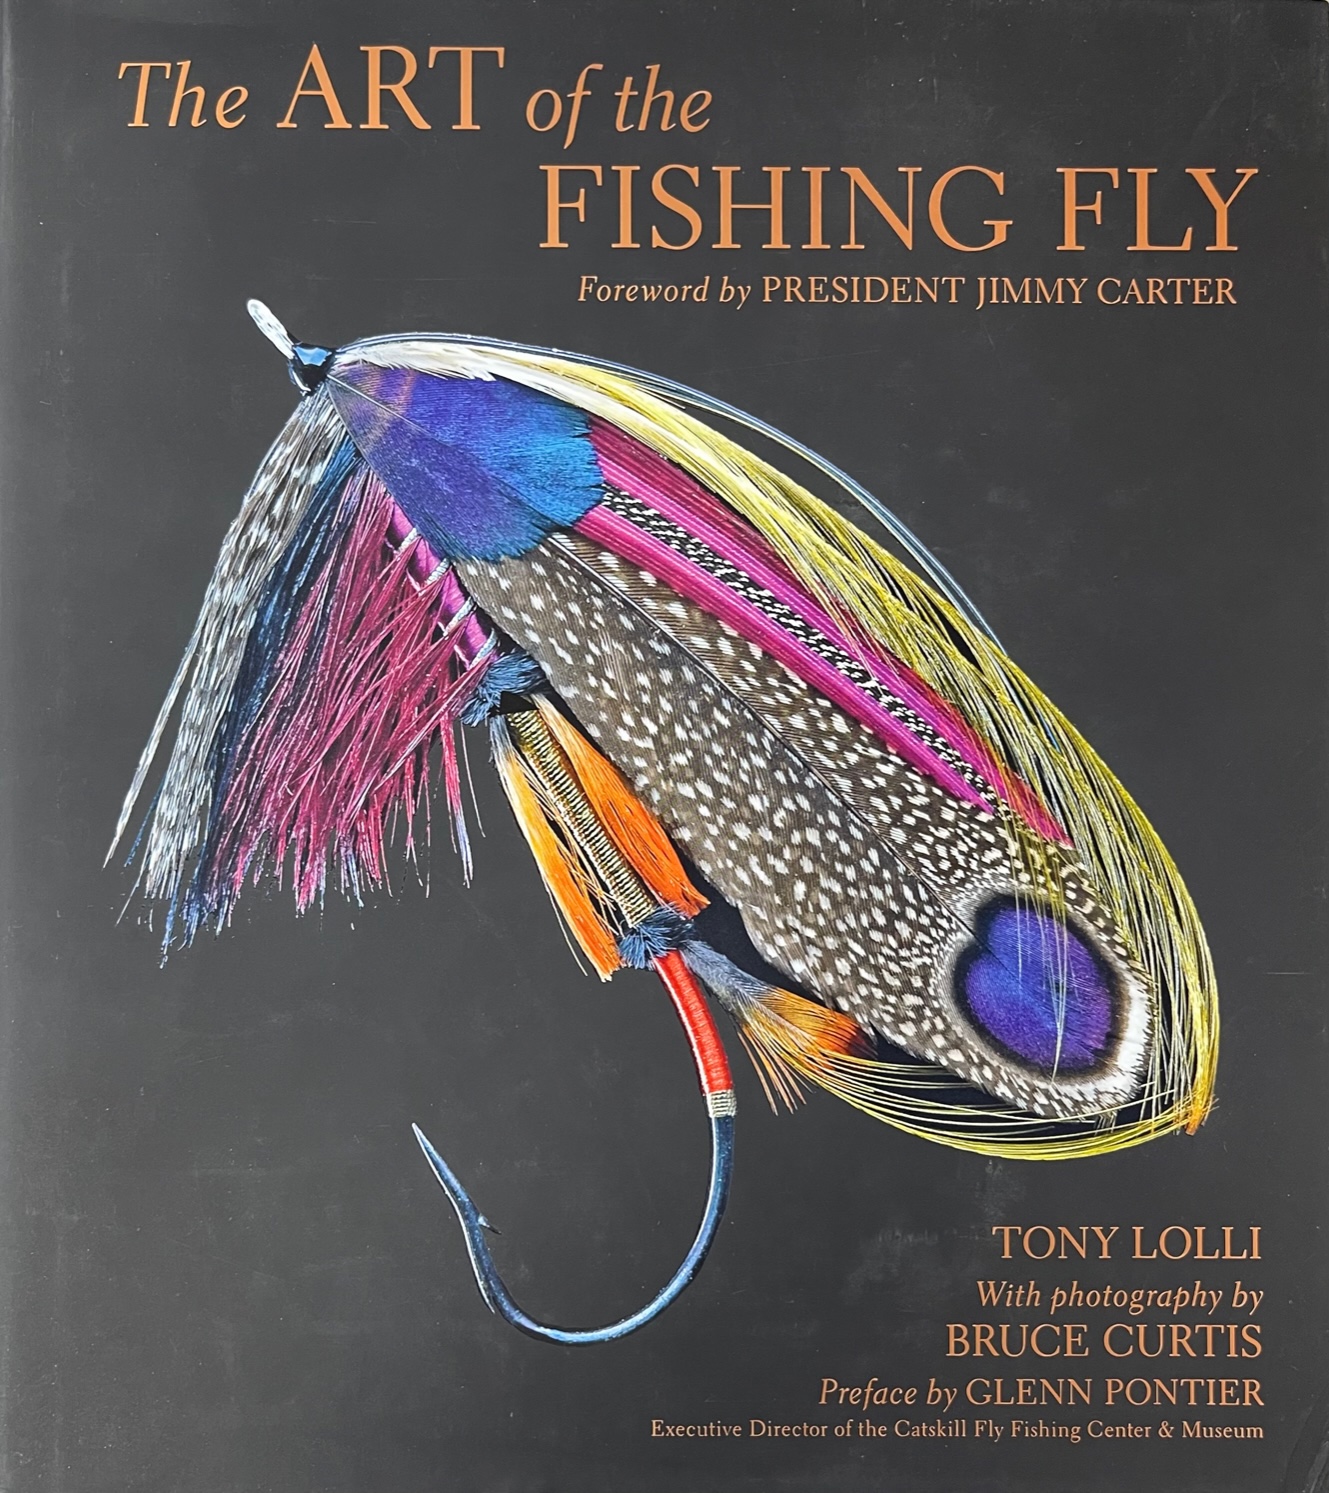 The ART of the FISHING FLY